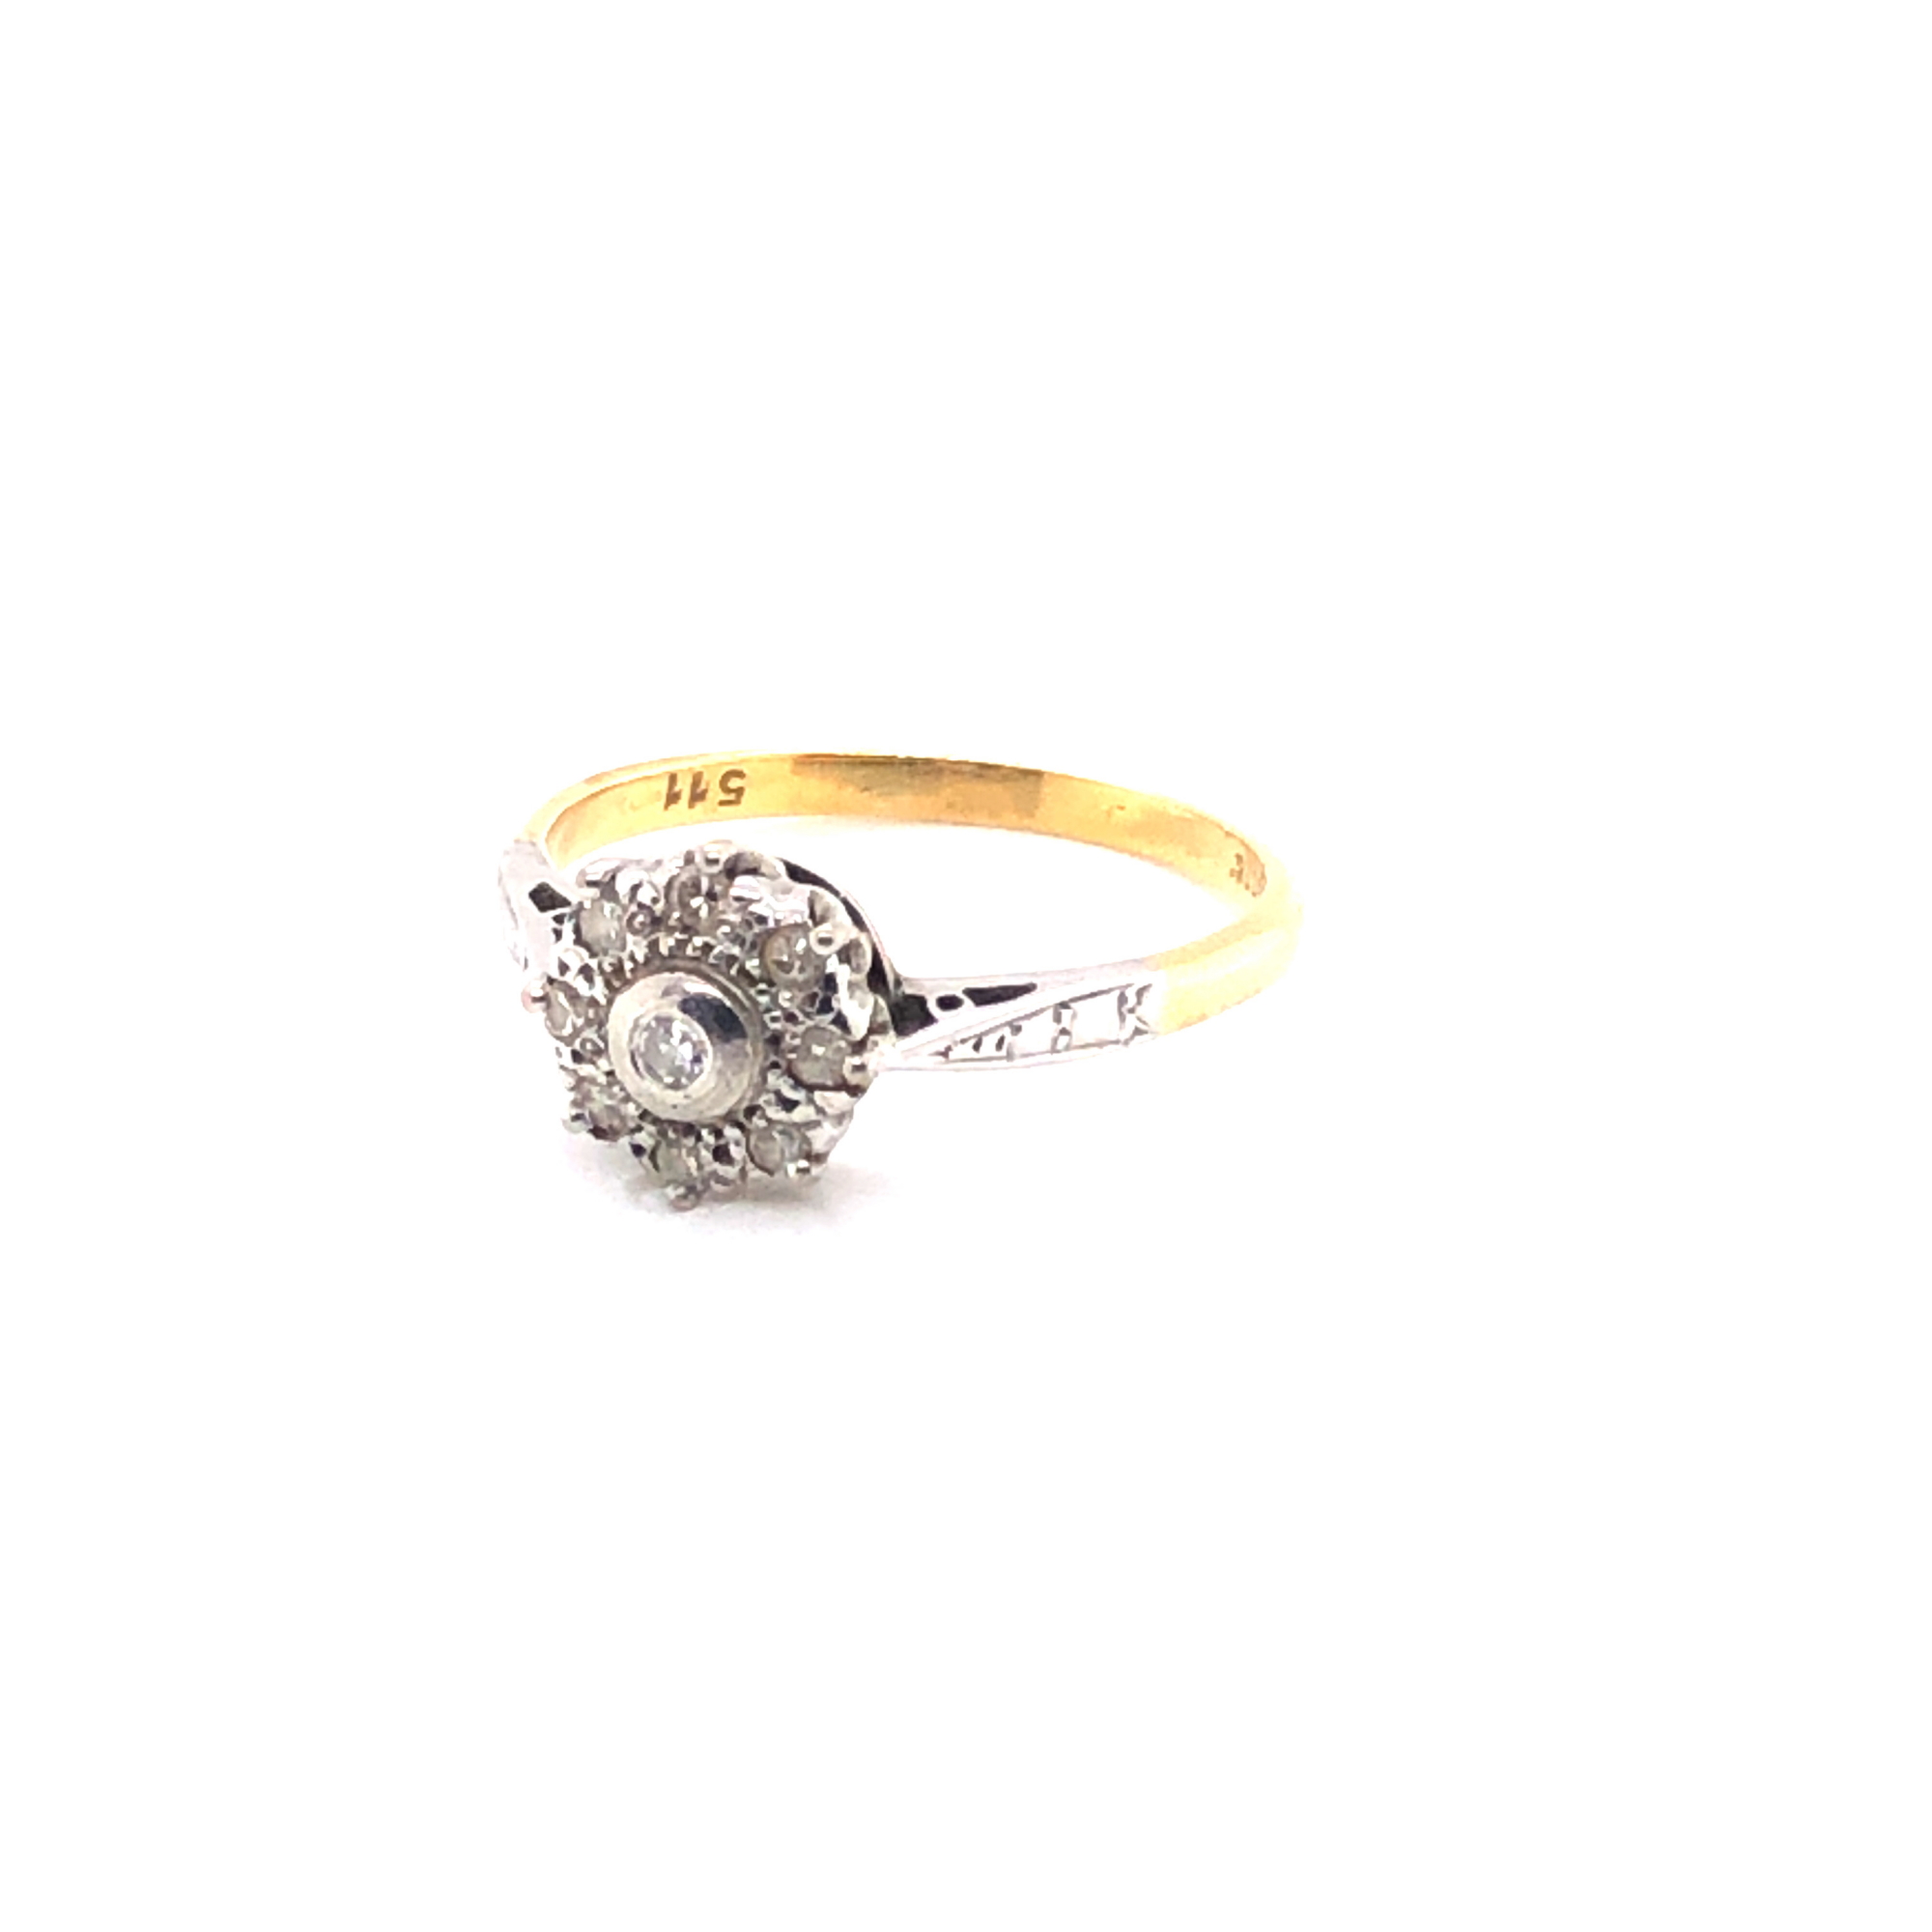 A VINTAGE 18ct YELLOW AND WHITE GOLD DIAMOND RING. THE INSIDE SHANK STAMPED 511, E & W, 18ct & OTHER - Image 3 of 6